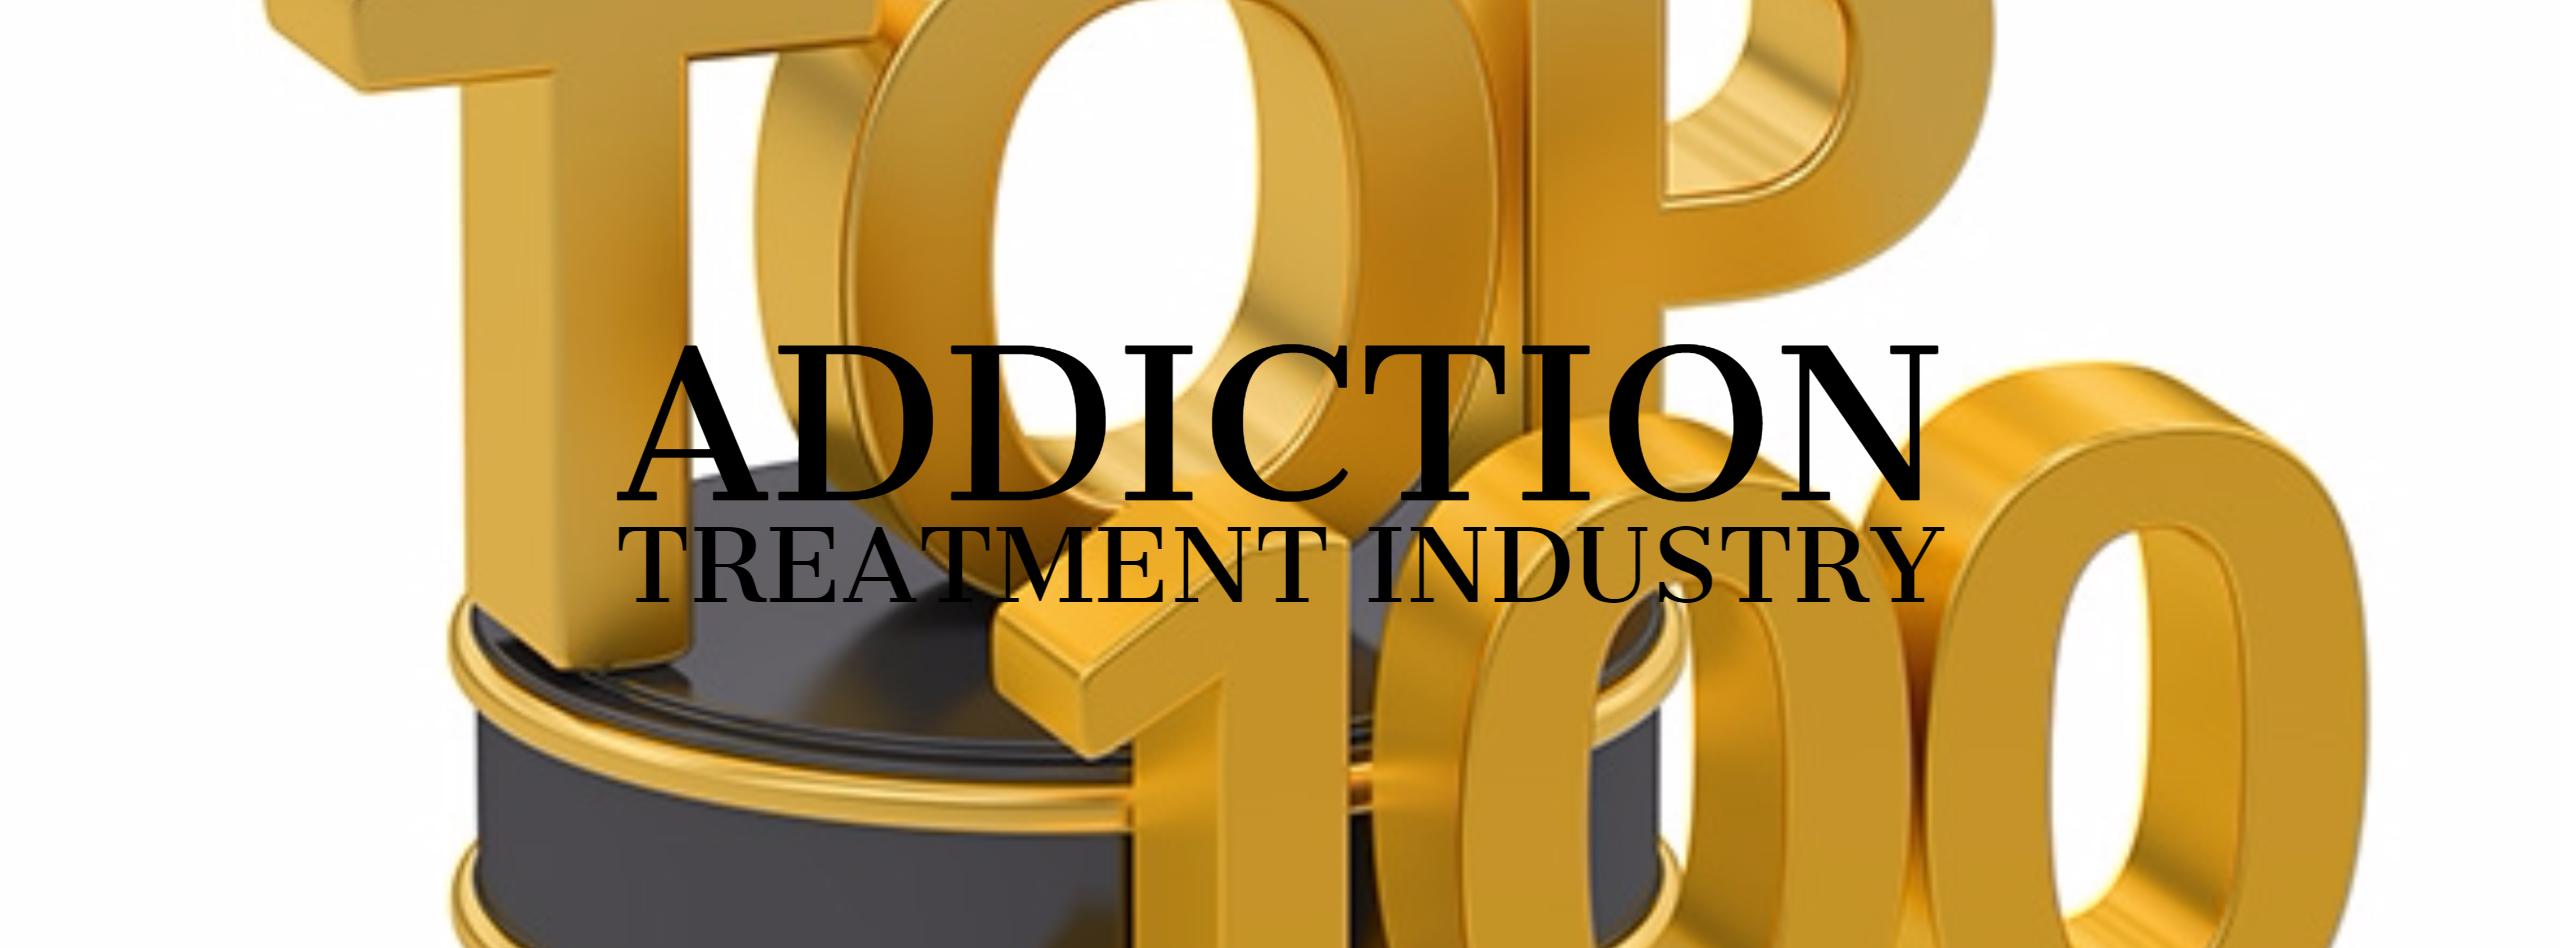 Top 100 Ethical Addiction Treatment Providers